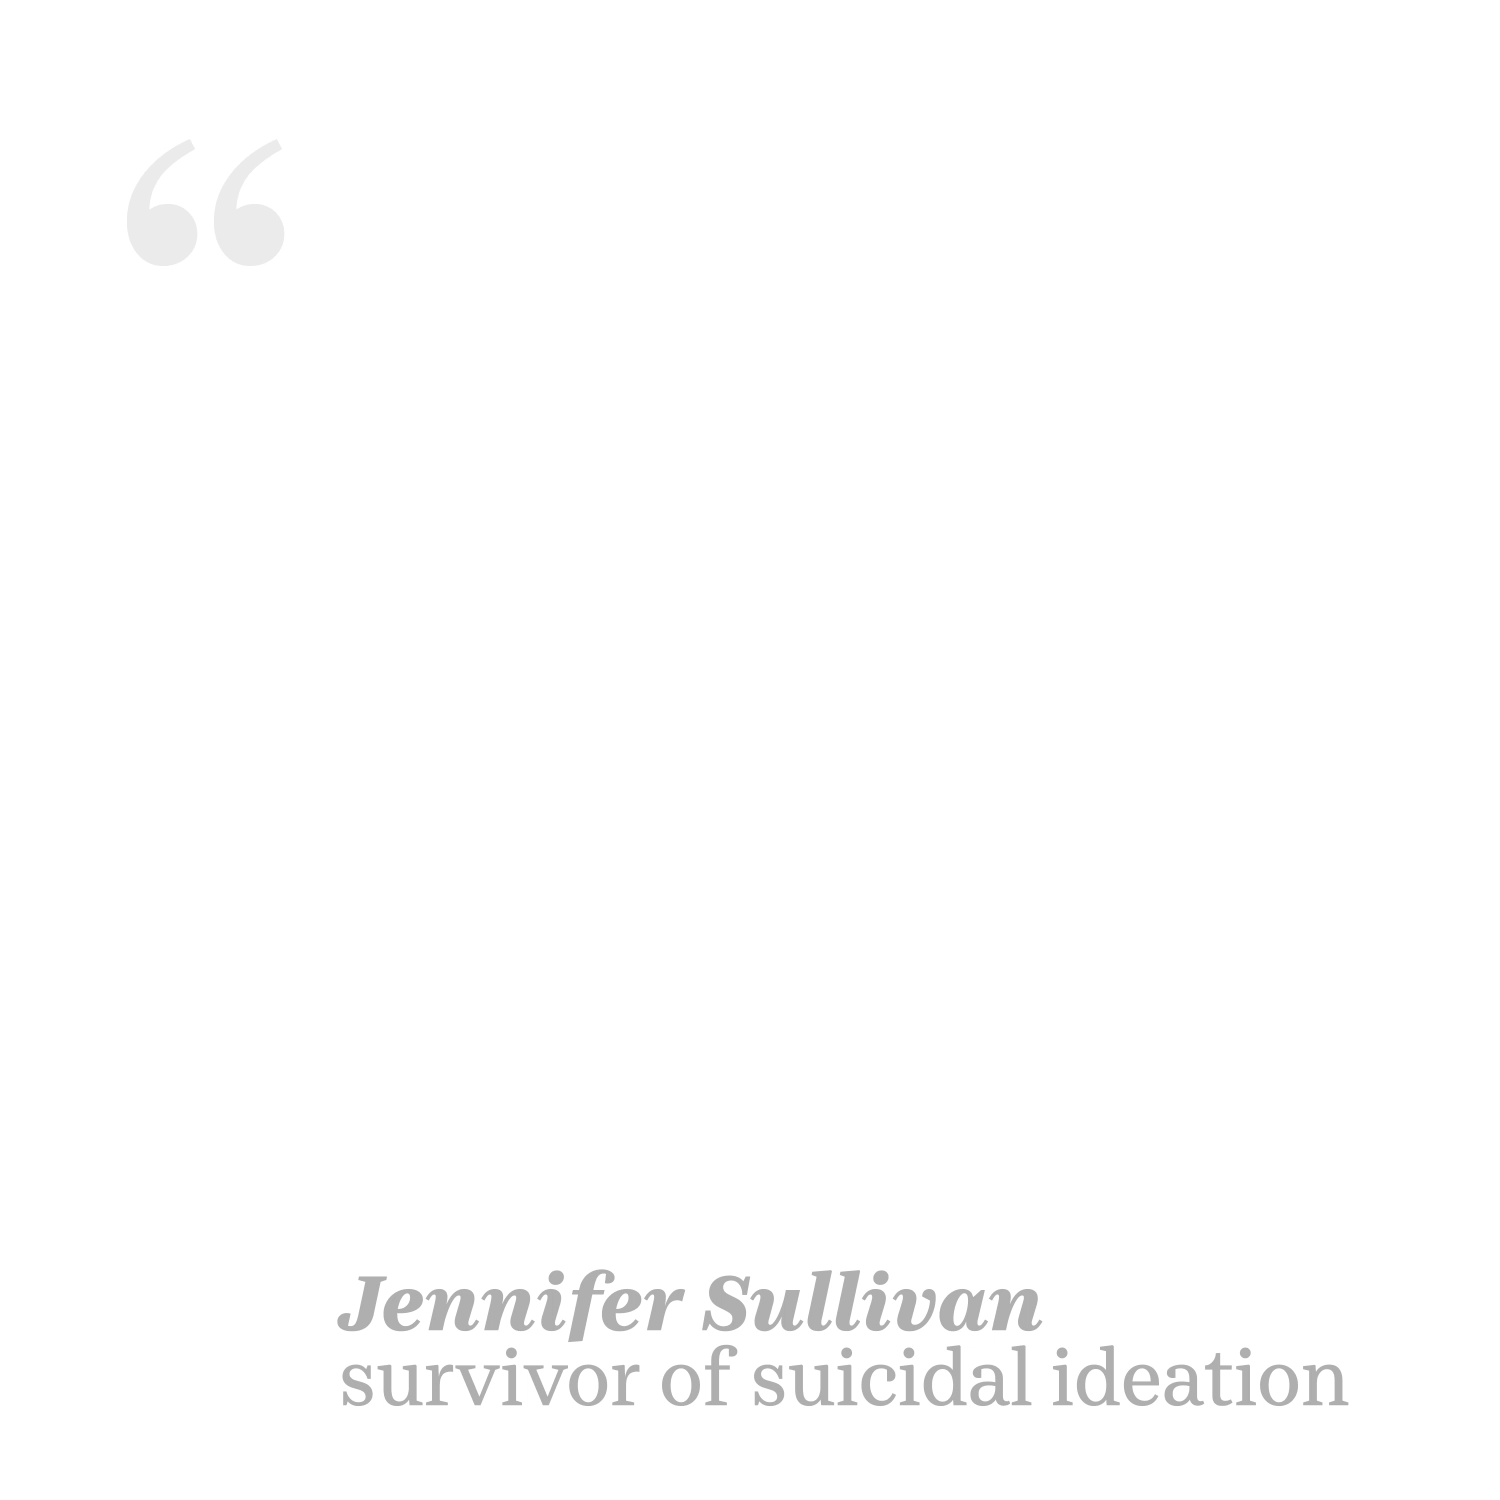 My Friend Is Suicidal: What Should I Do?